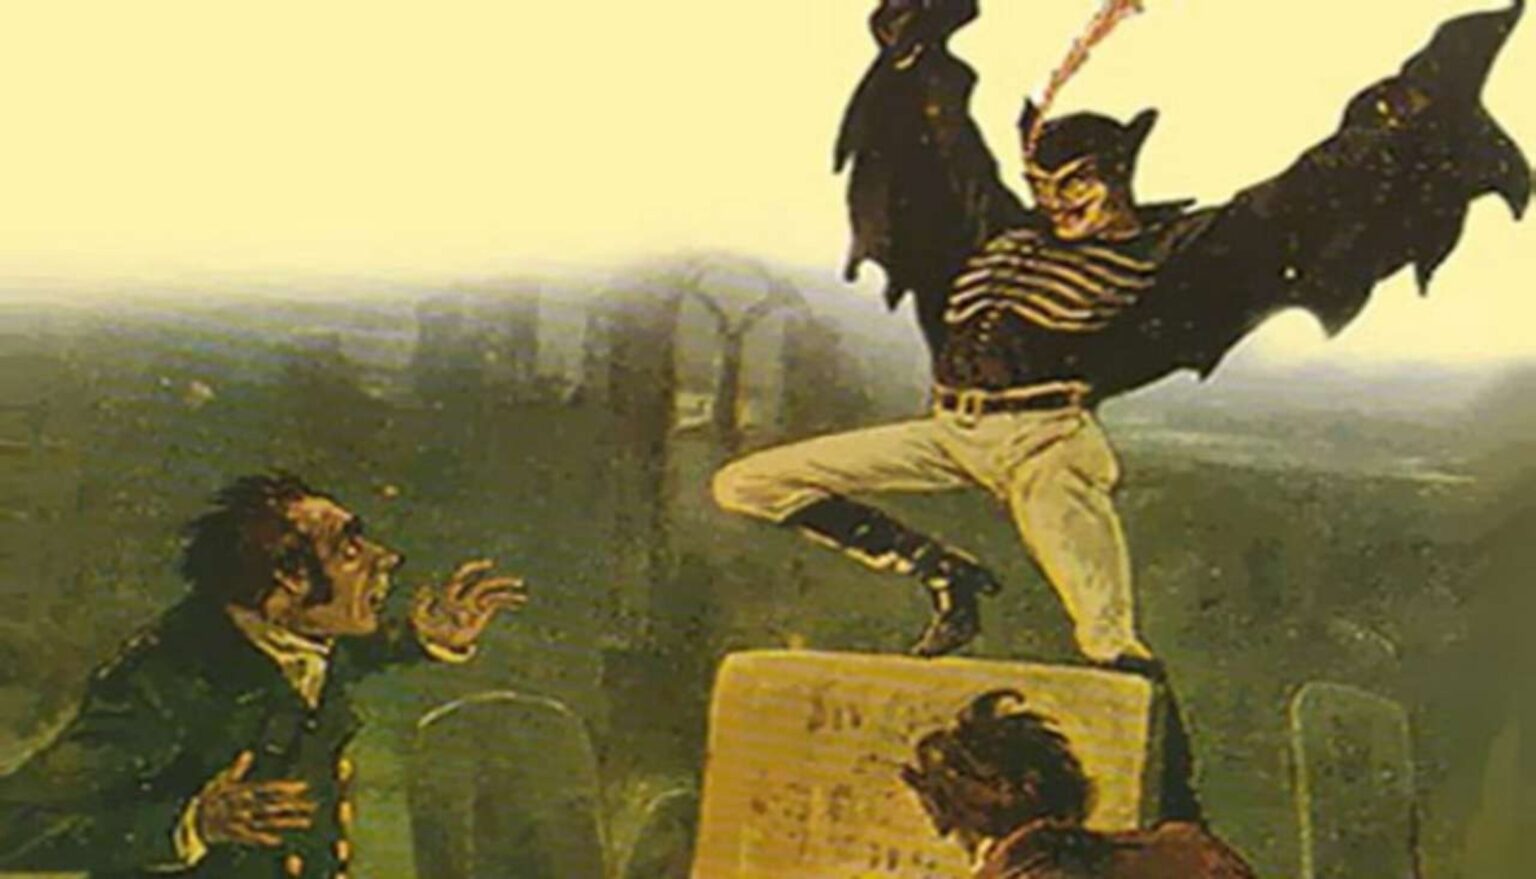 Itching for a new scary bedtime story? 19th century London has another one for you. Leap into the legend with us as we explore Spring Heeled Jack.